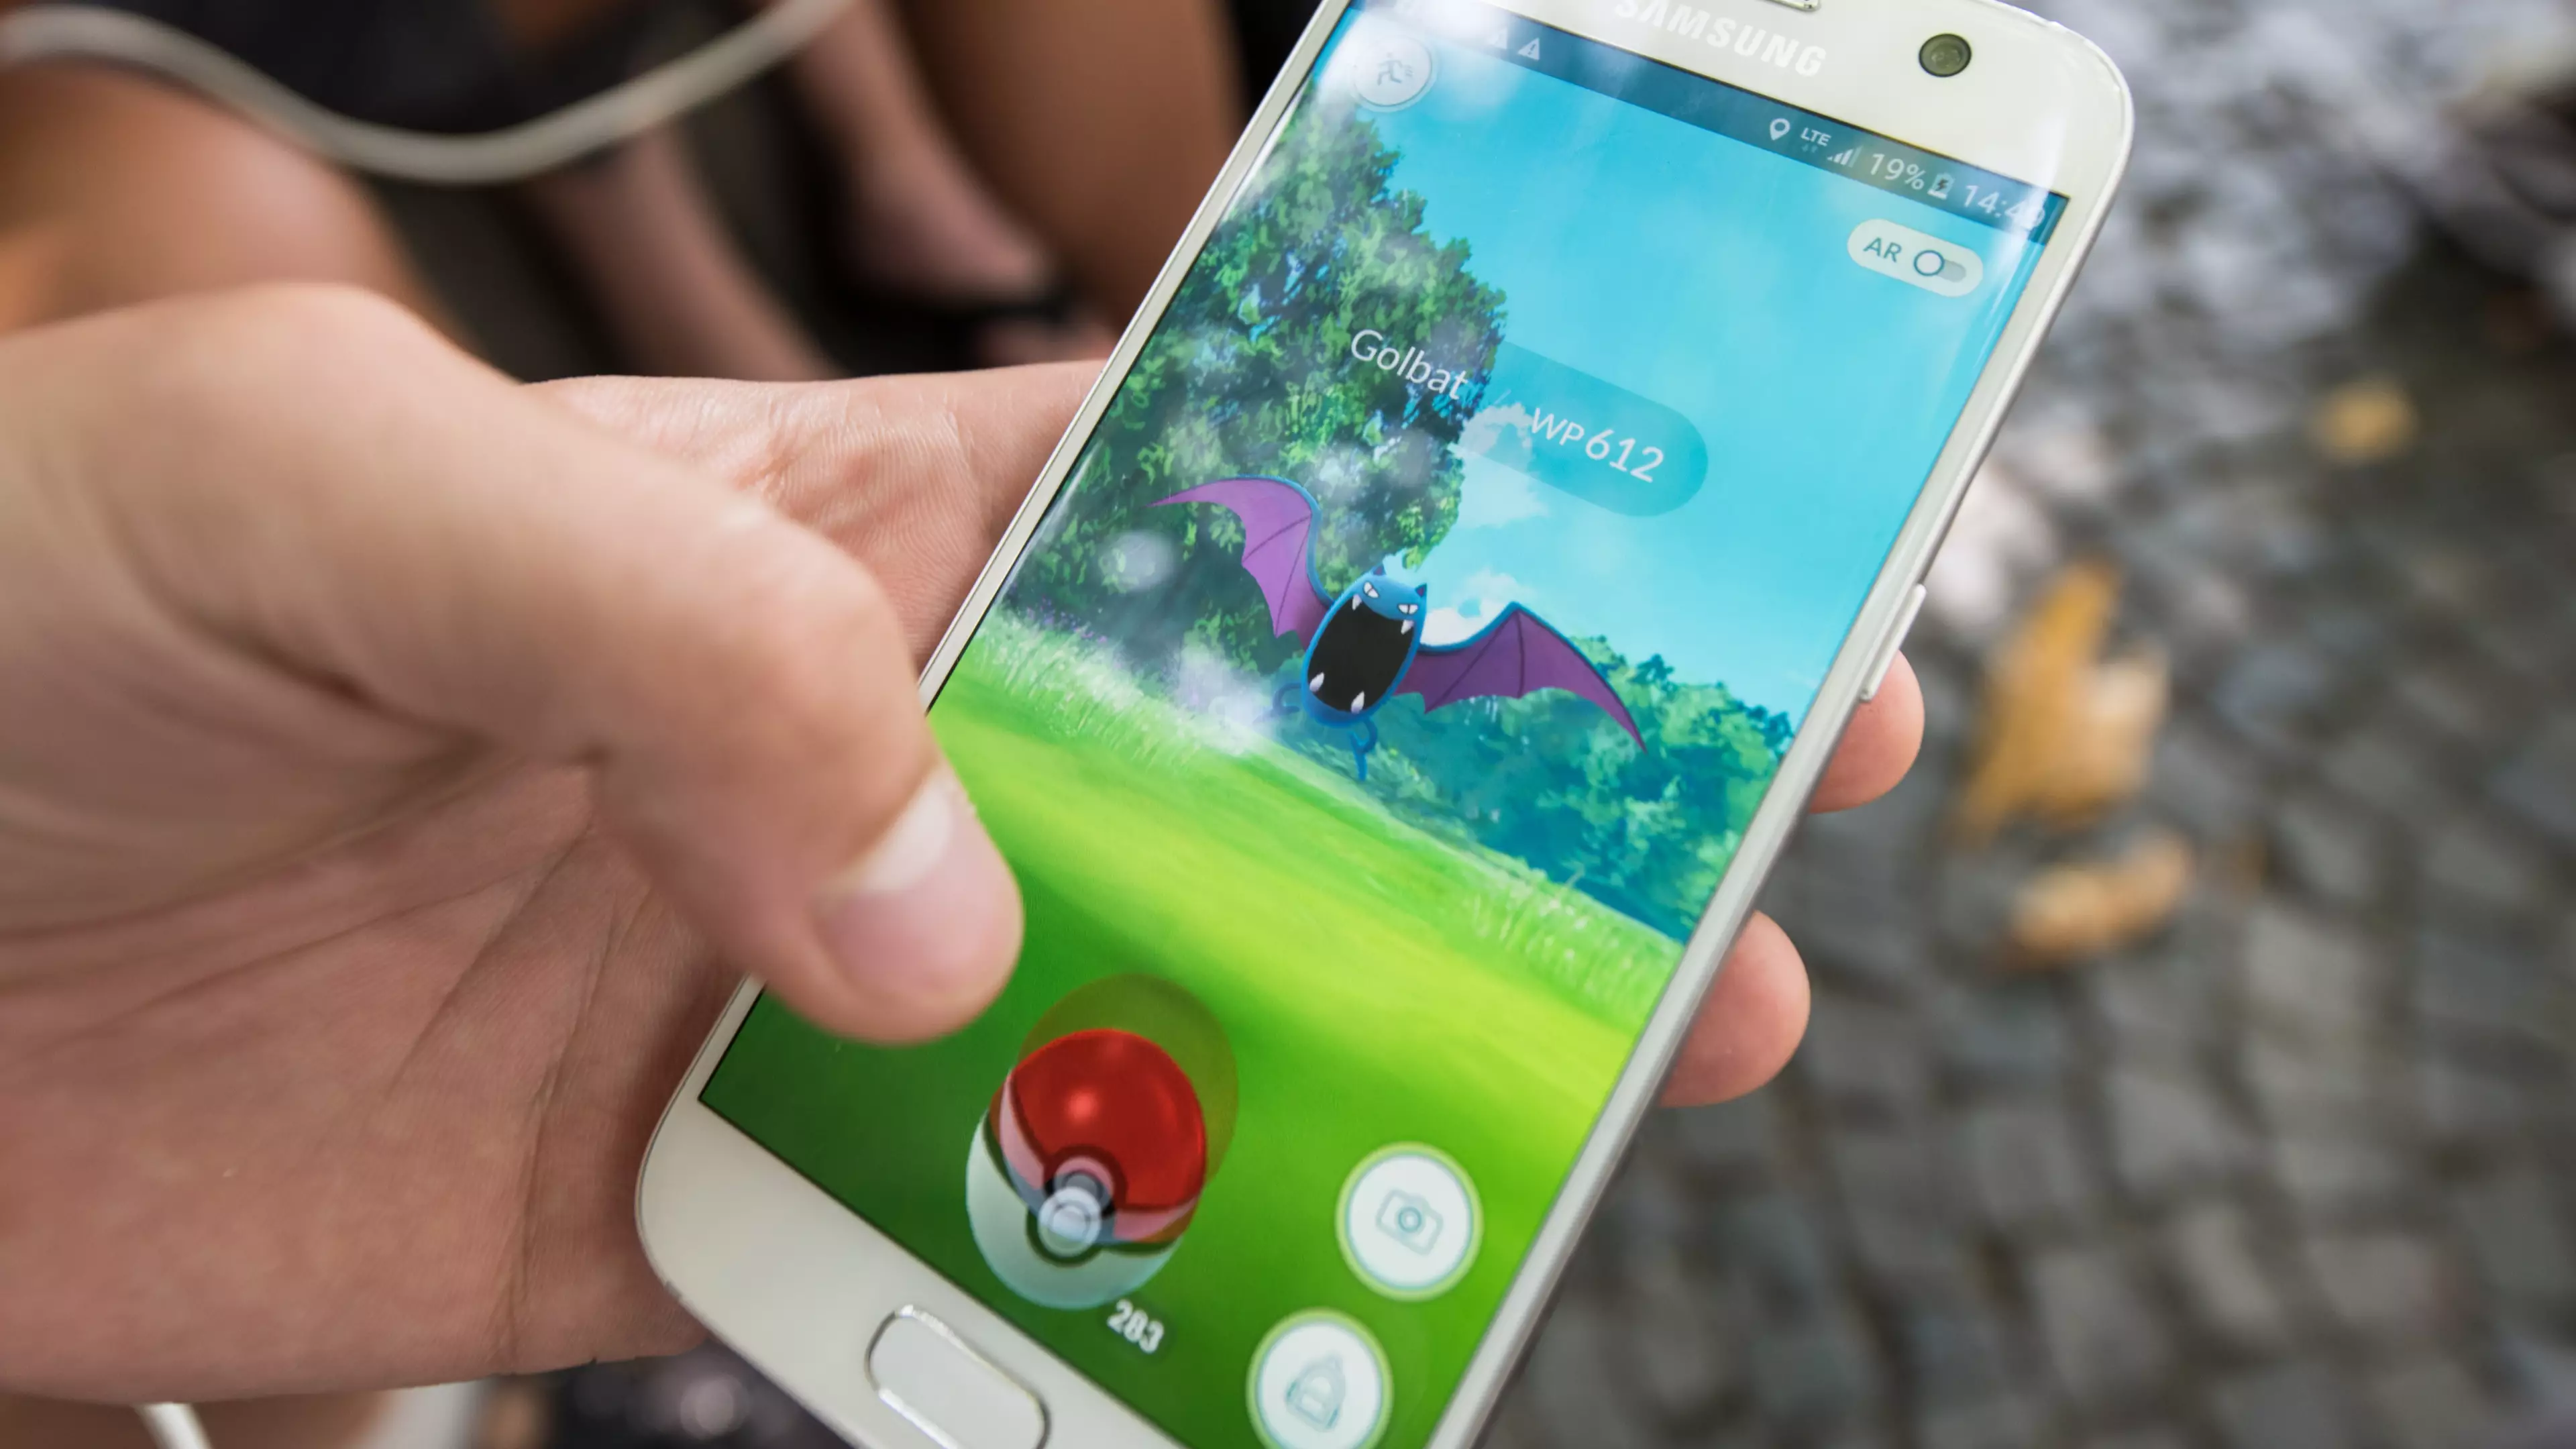 Melbourne Man Fined $1,652 For Travelling 14kms To Play Pokémon Go